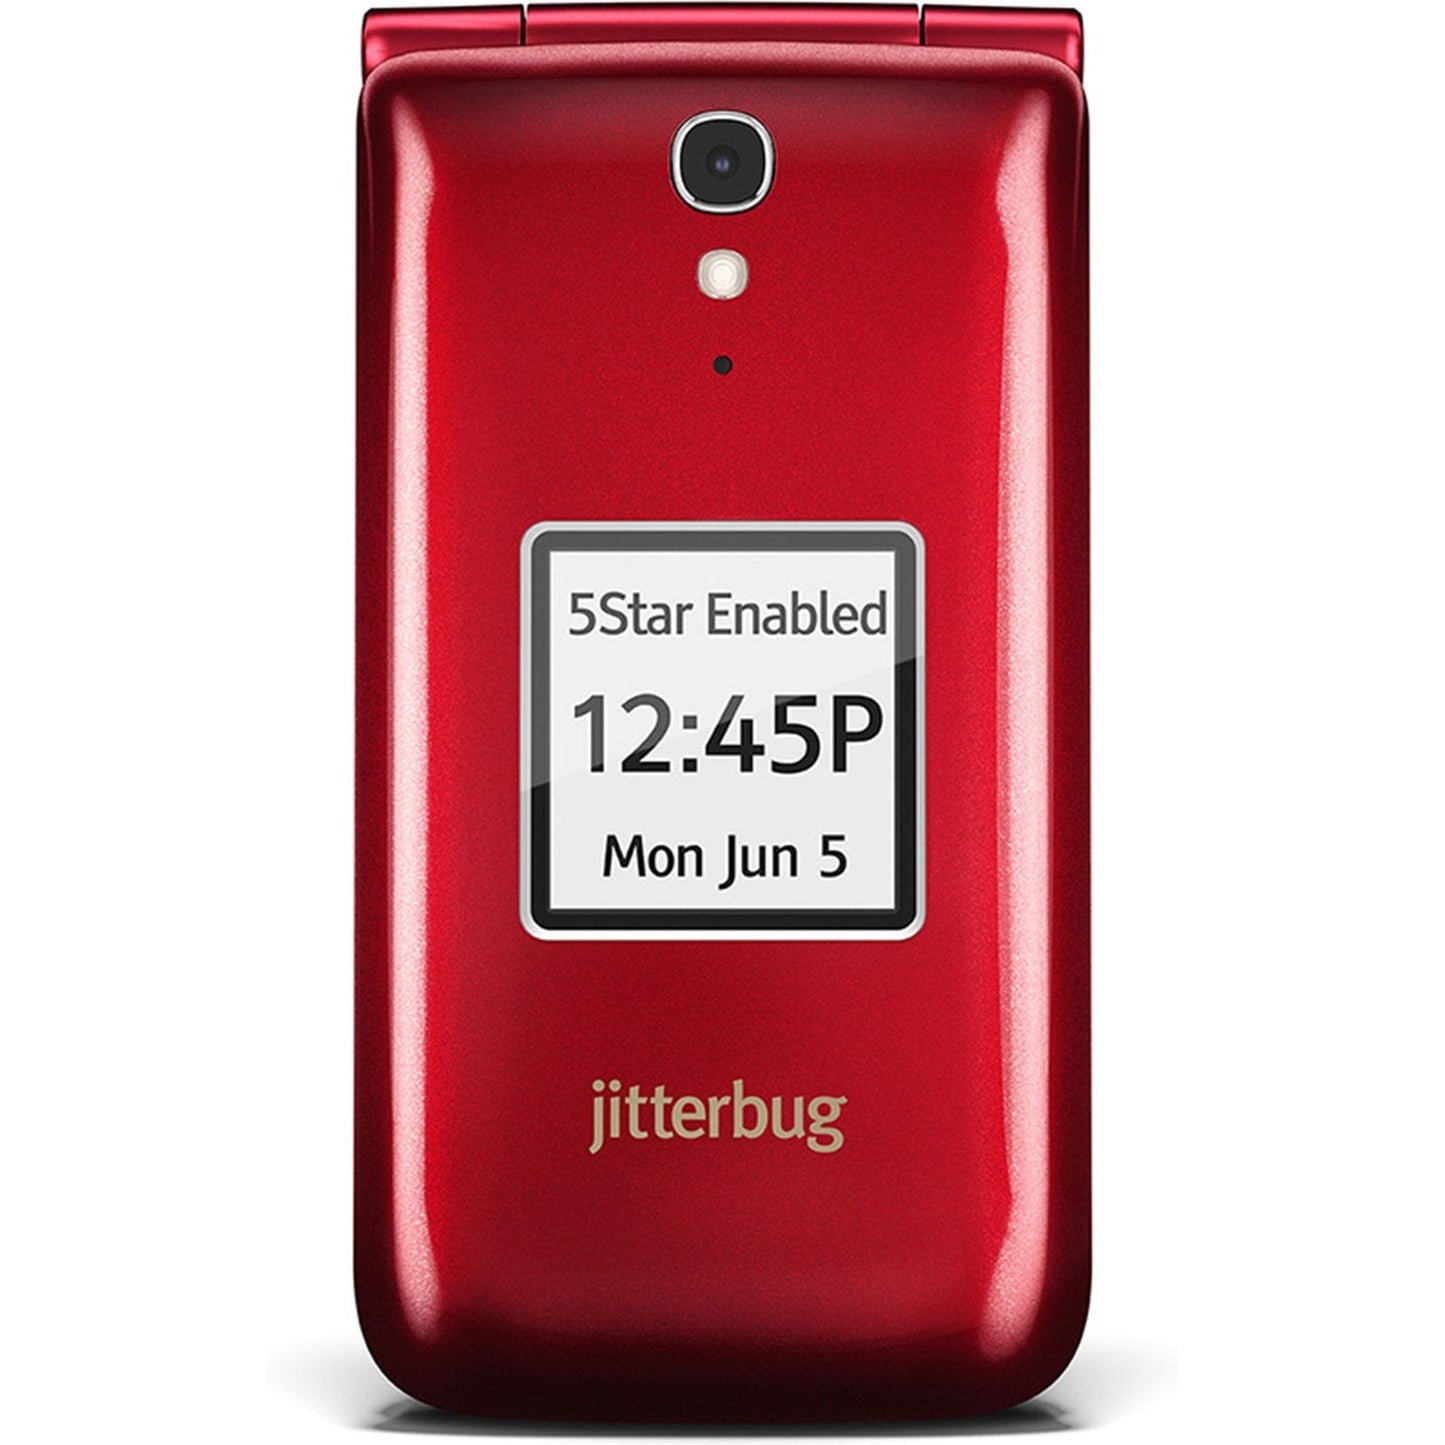 Jitterbug Flip Easy-to-Use Mobile Cell-Phone - Red